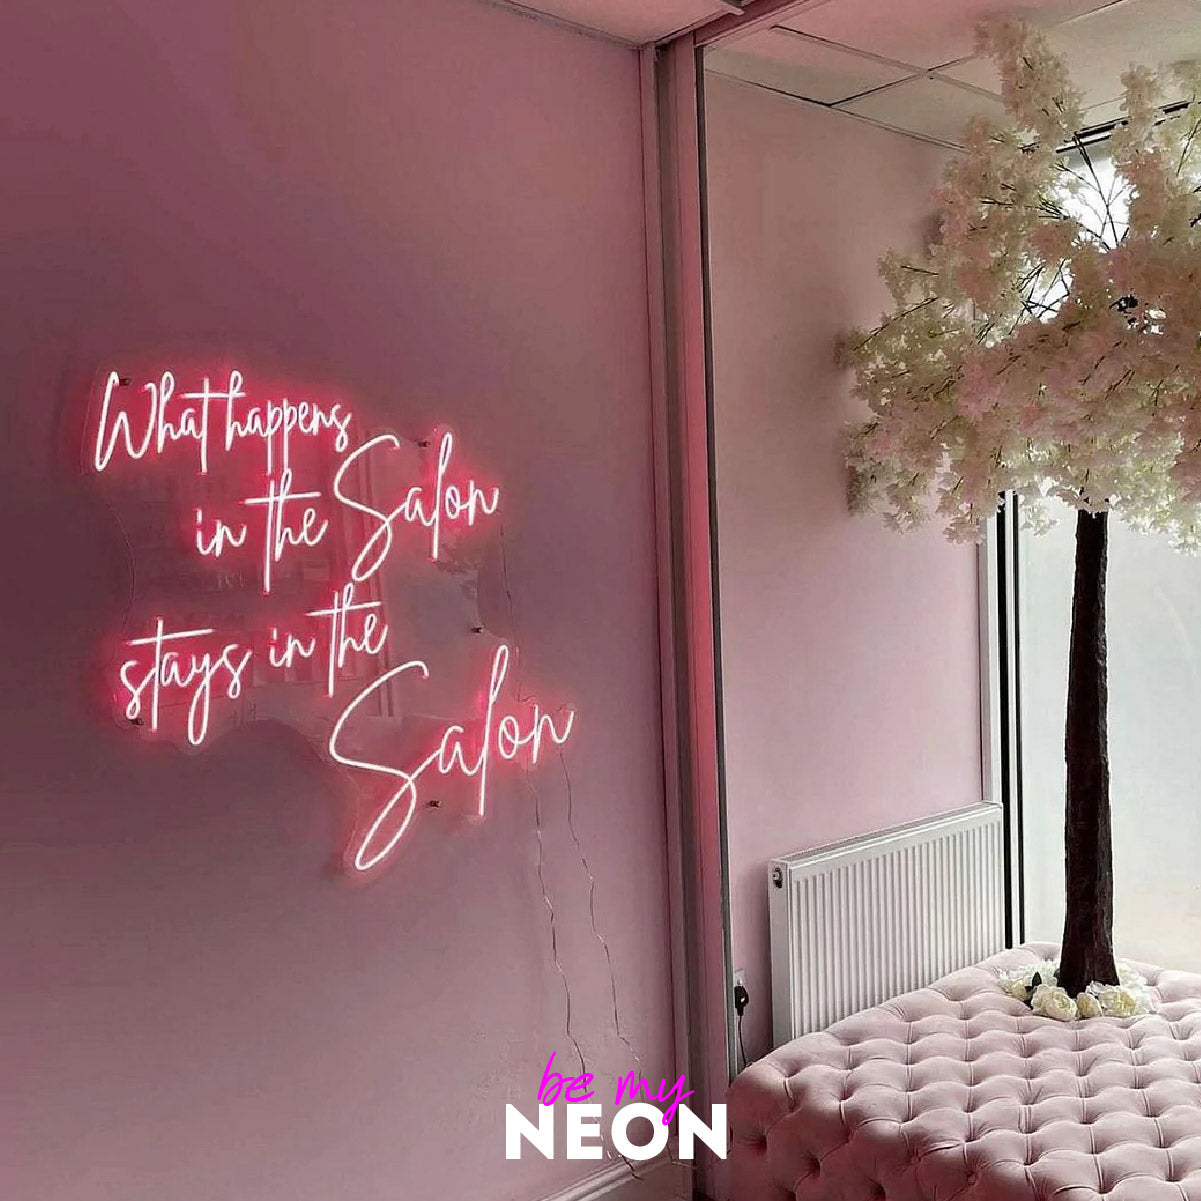 "What happens in the Salon stays in the Salon" LED Neonschild